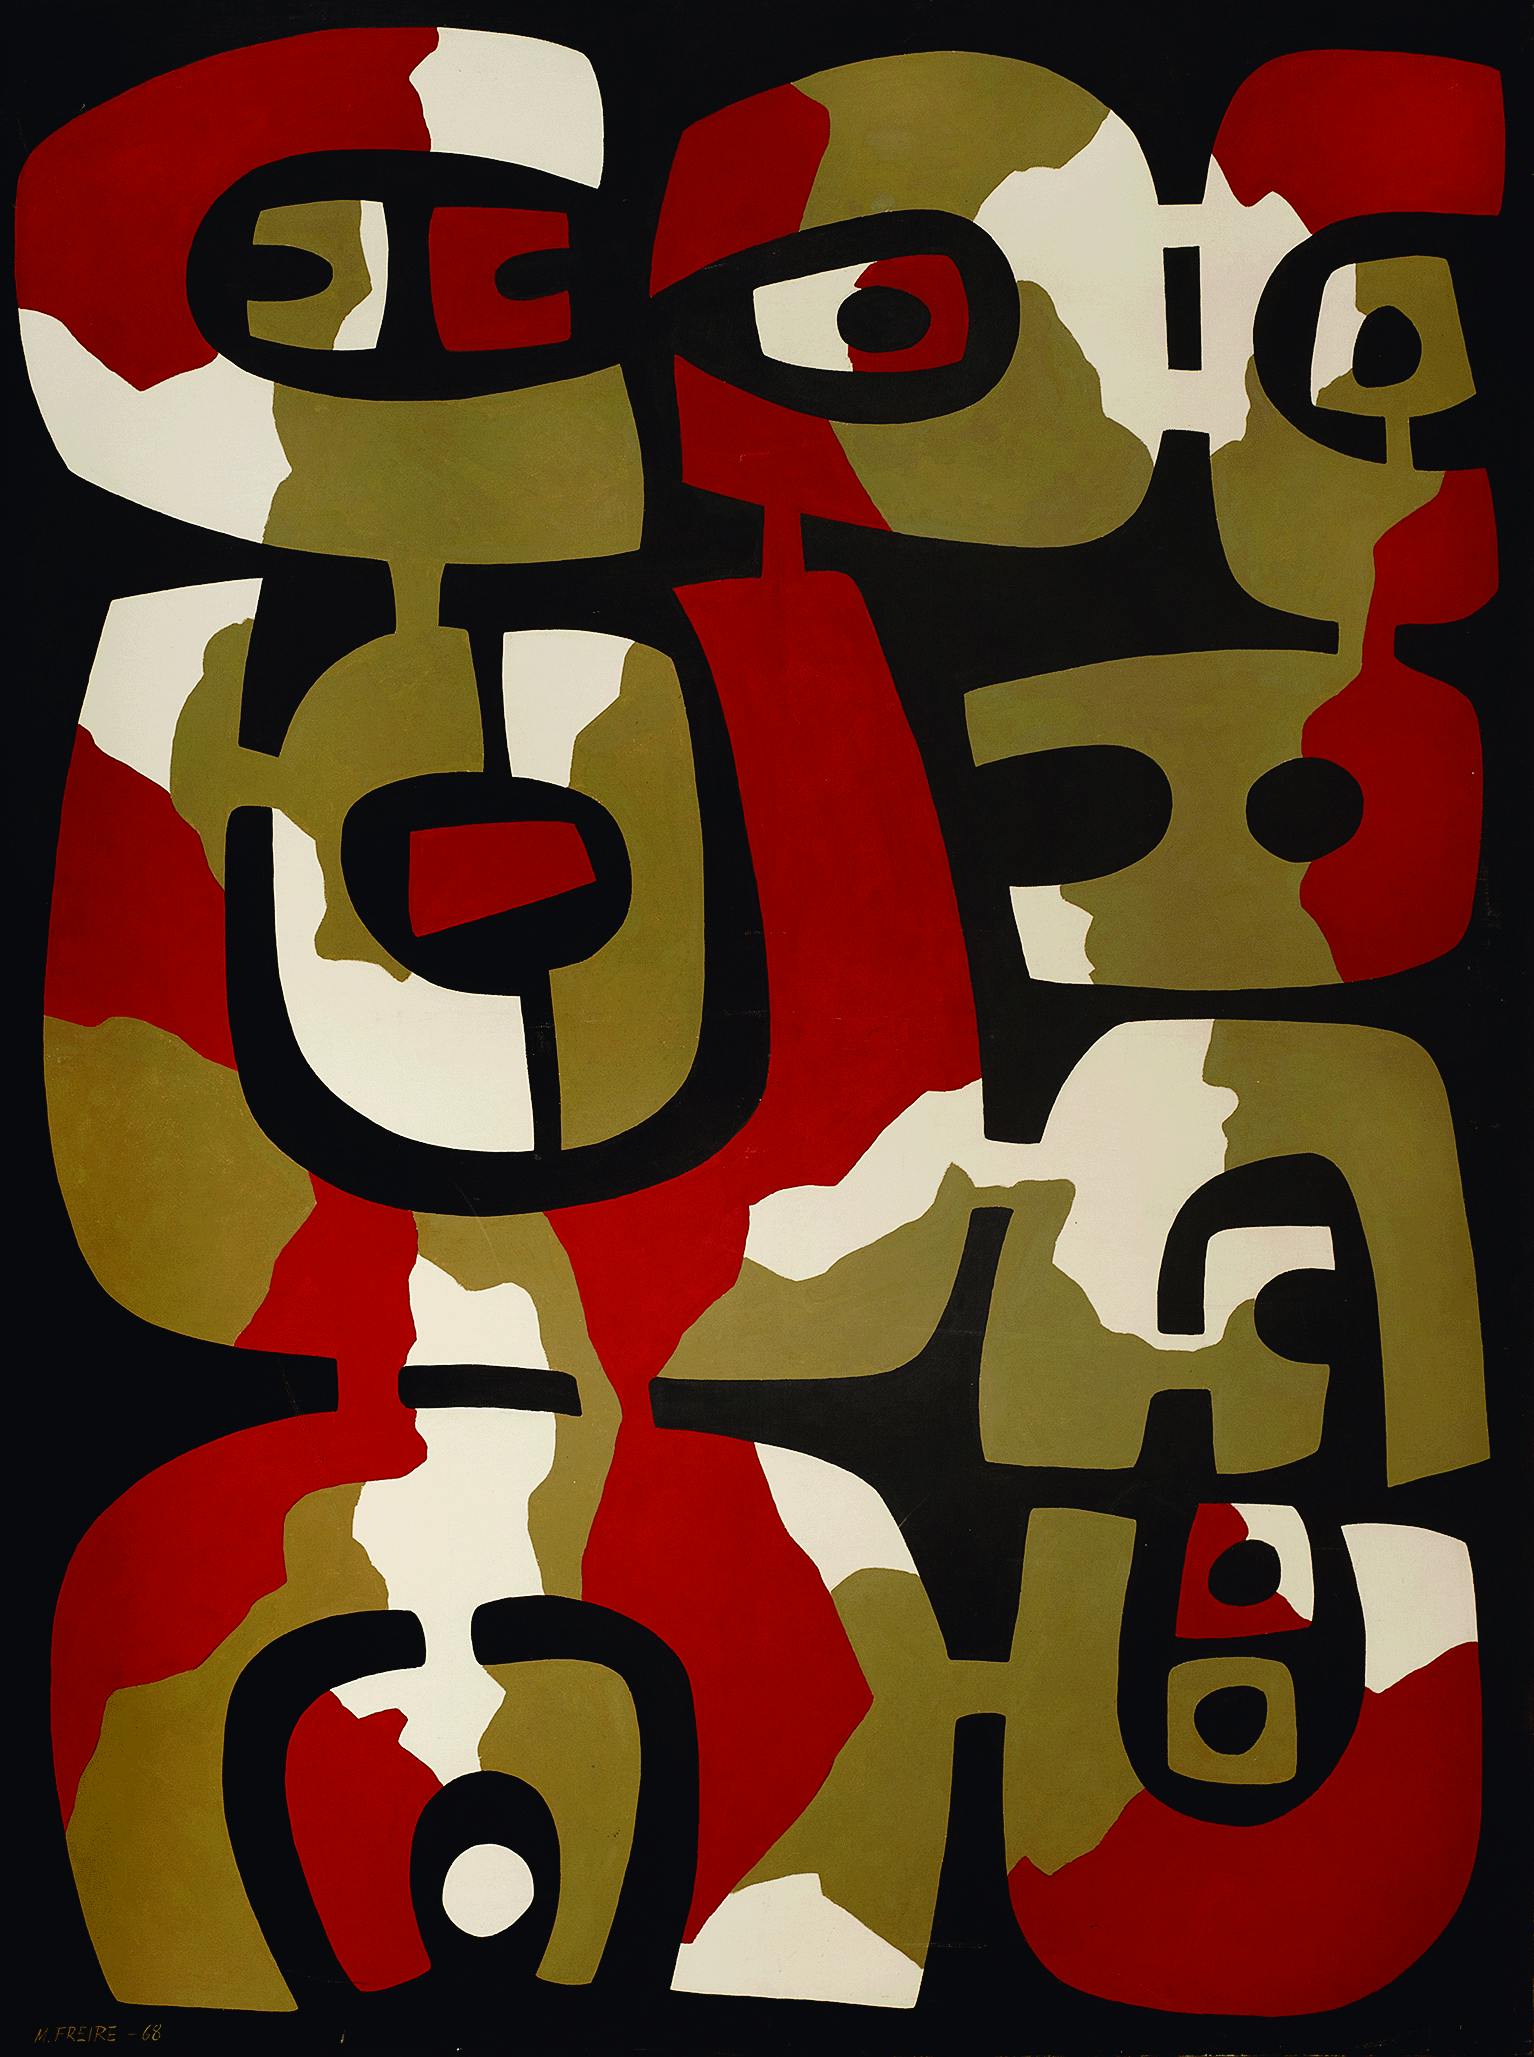 A painting of abstract horseshoe-like forms using black, red, light yellow, and brown.